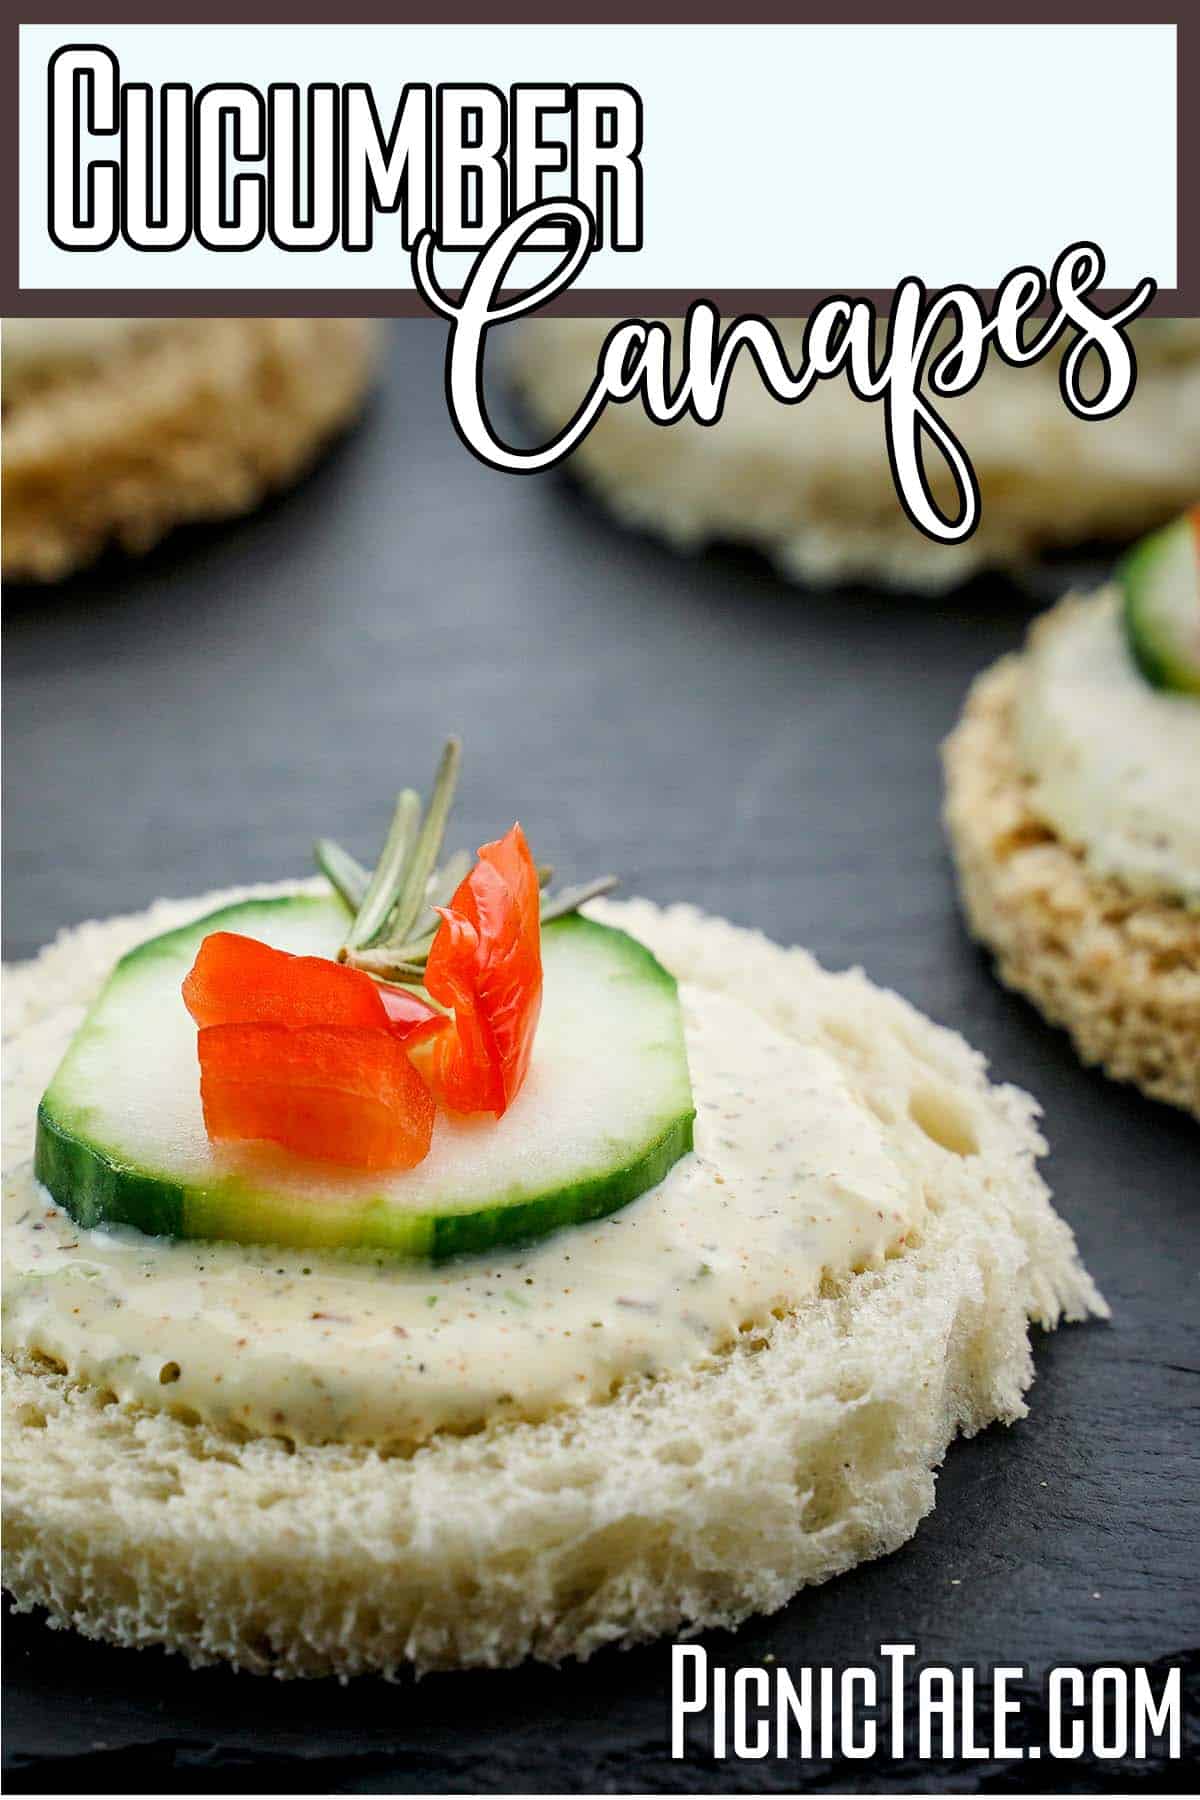 simple picnic snack with text which reads Cucumber Canapes